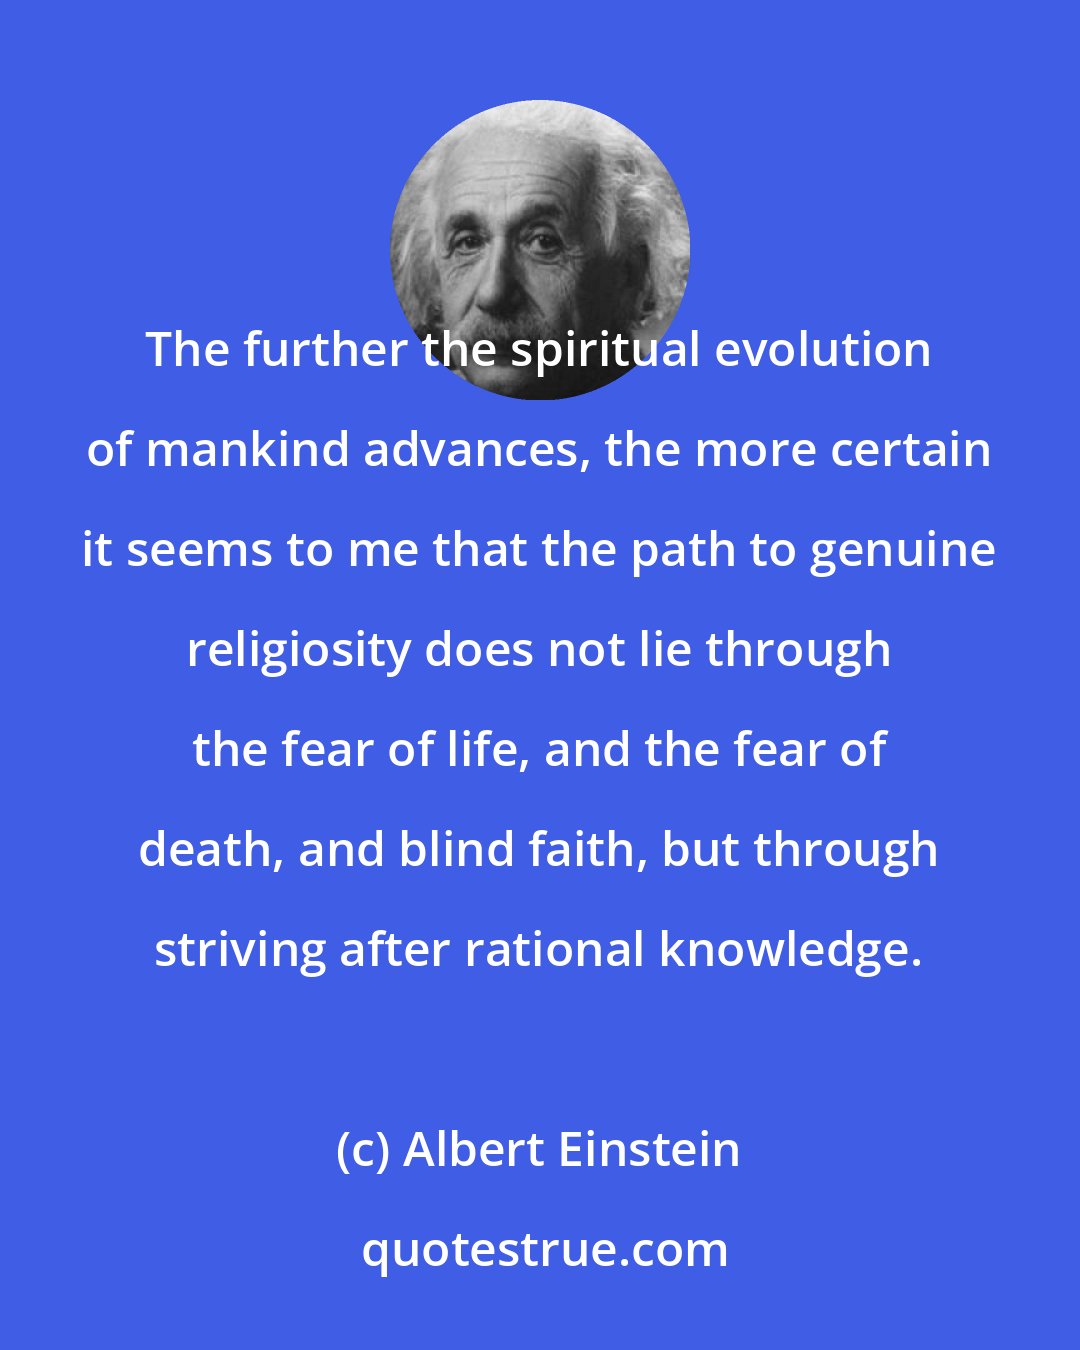 Albert Einstein: The further the spiritual evolution of mankind advances, the more certain it seems to me that the path to genuine religiosity does not lie through the fear of life, and the fear of death, and blind faith, but through striving after rational knowledge.